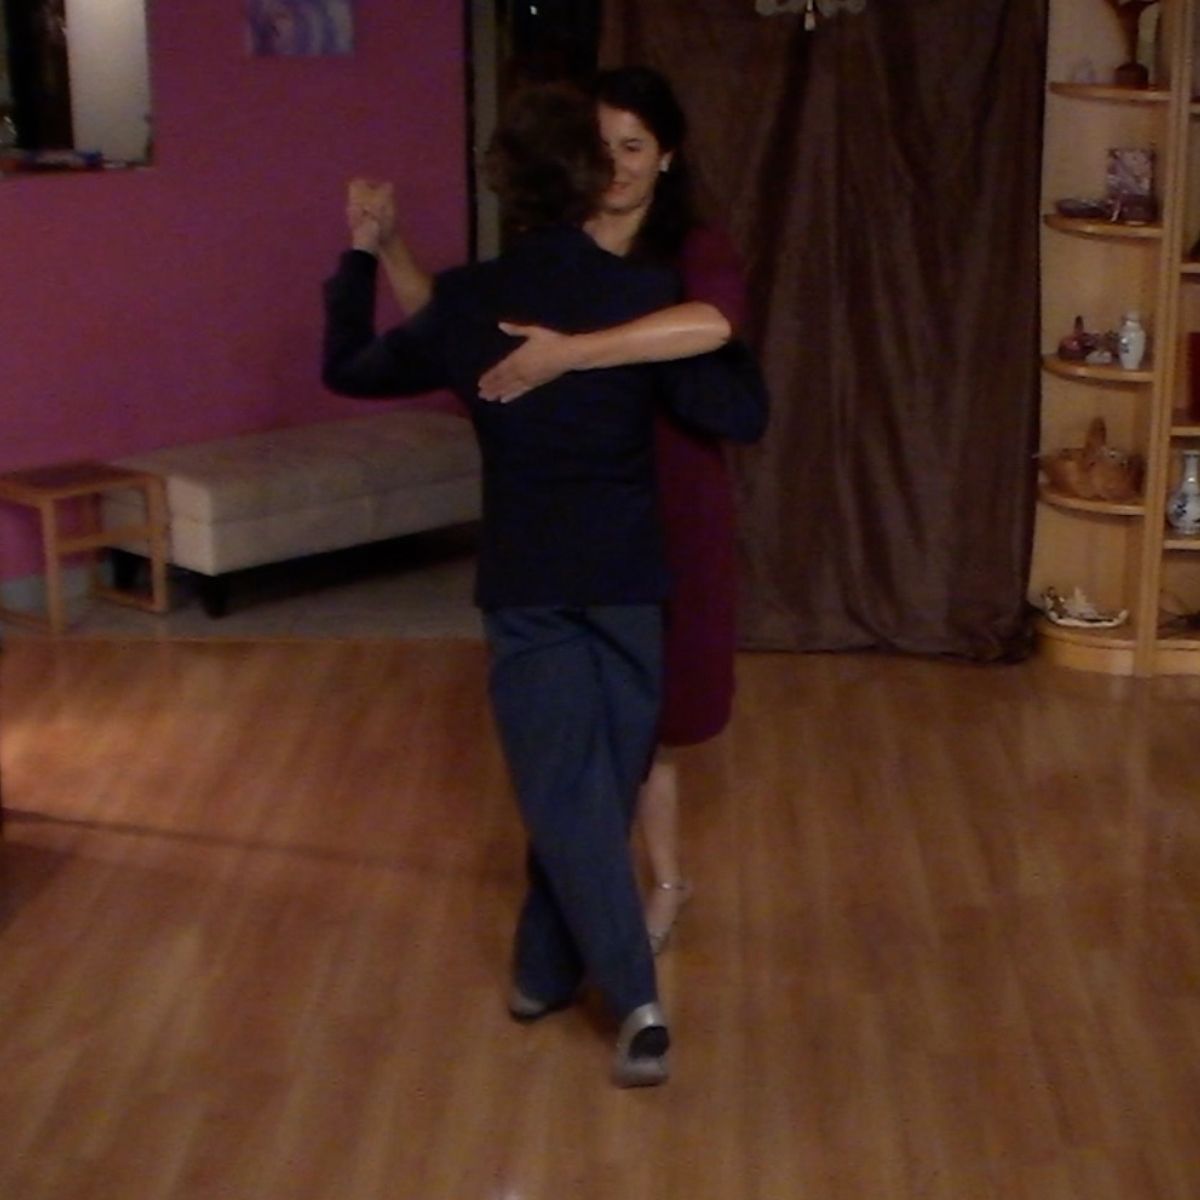 Argentine Tango dance lesson by Marcelo Solis assisted by Mimi